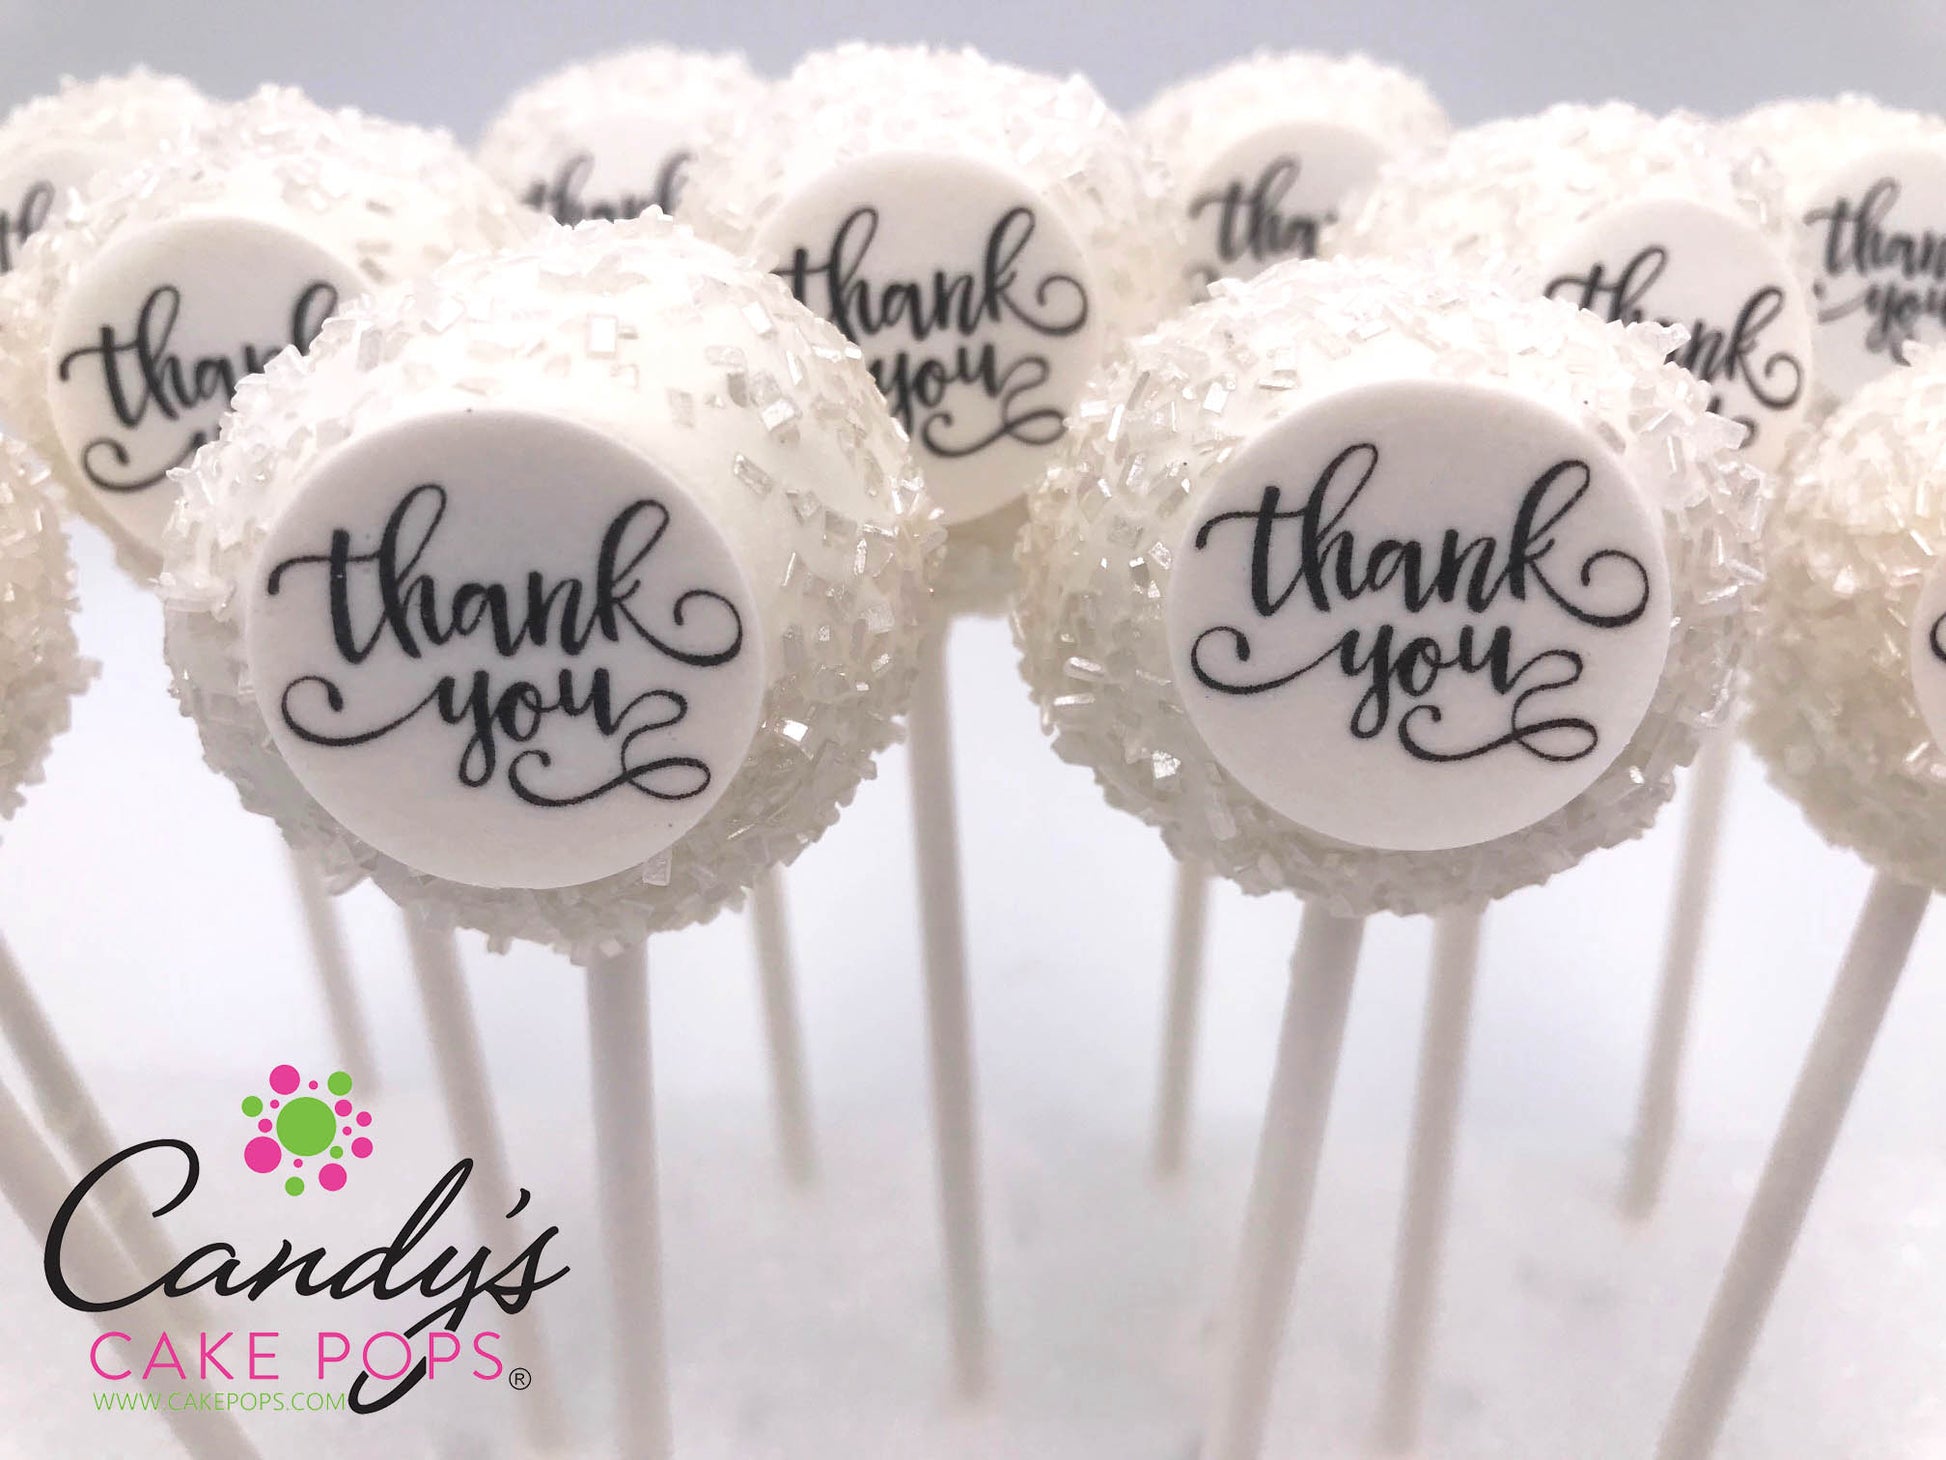 Thank You Gift Decal Cake Pops - Candy's Cake Pops